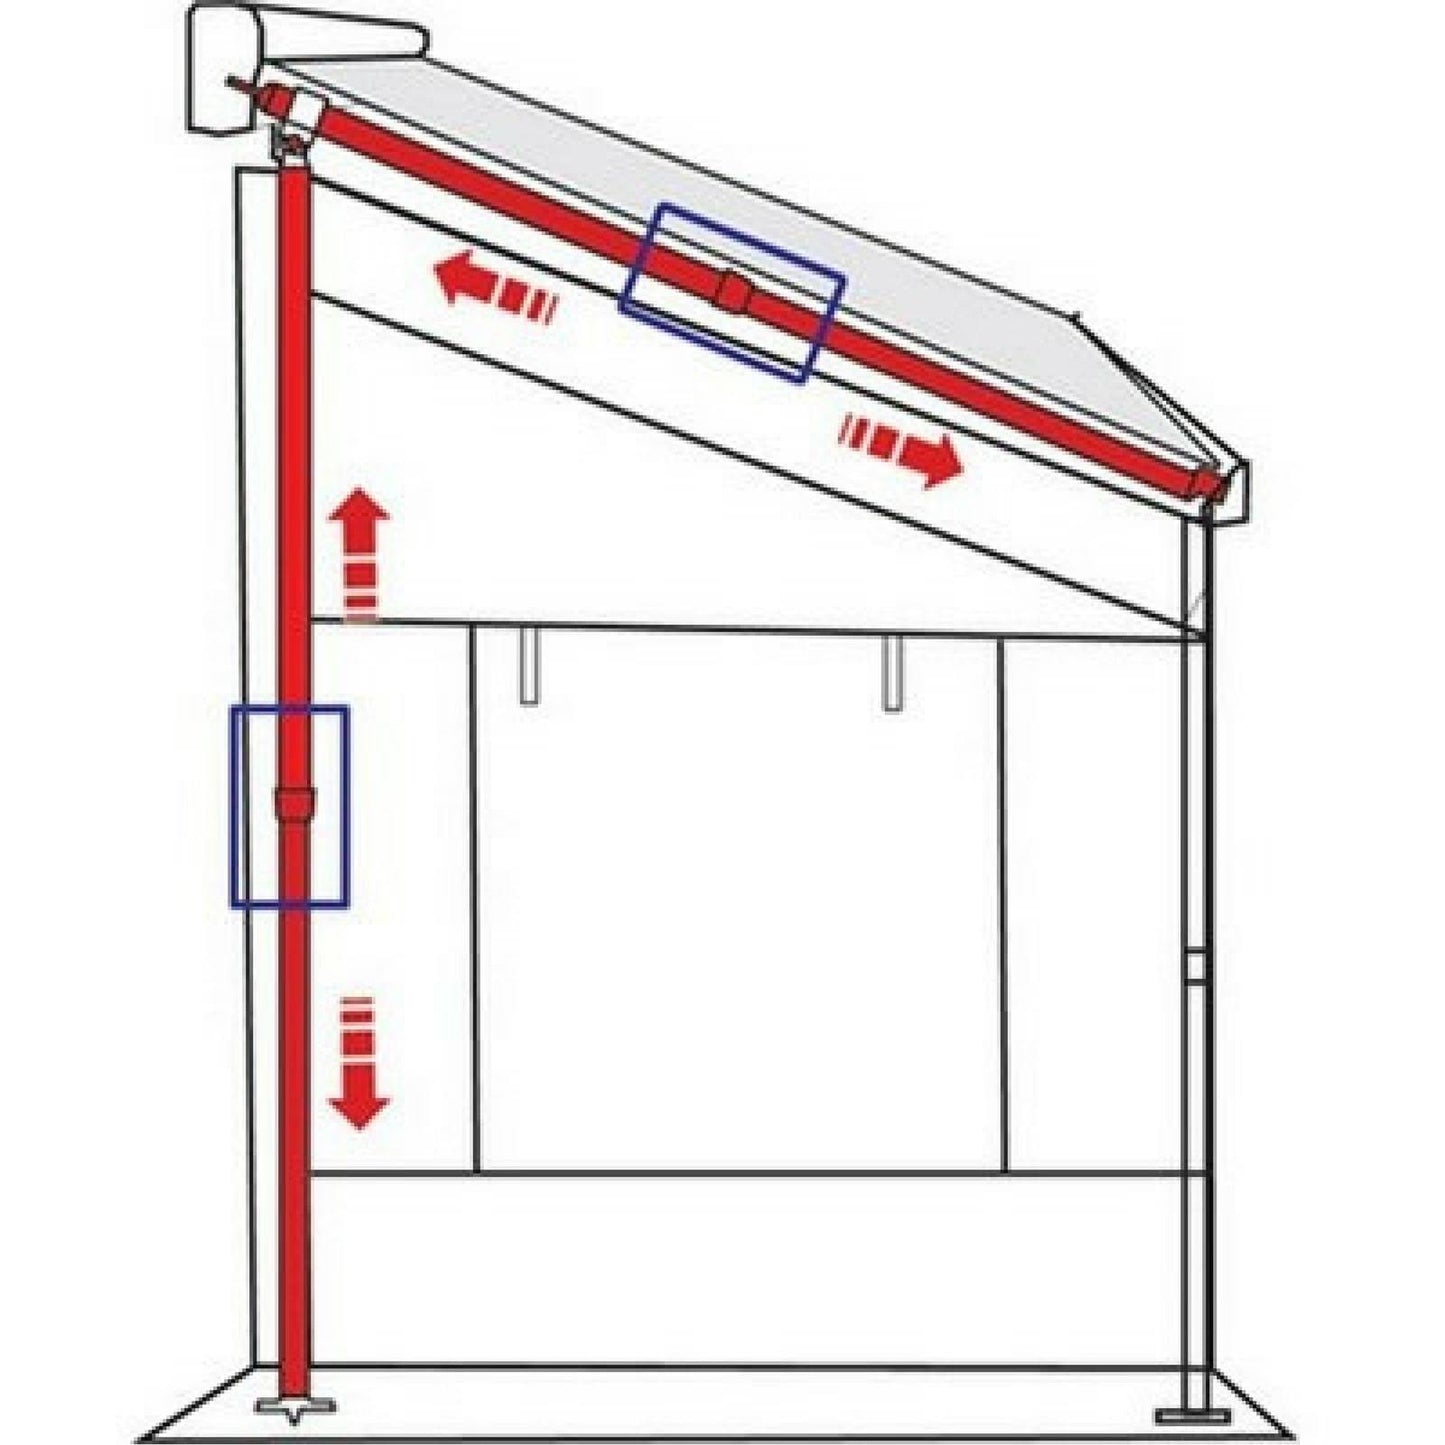 Fiamma Rapid Set ZIP Awning Poles made by Fiamma. A Accessories sold by Quality Caravan Awnings